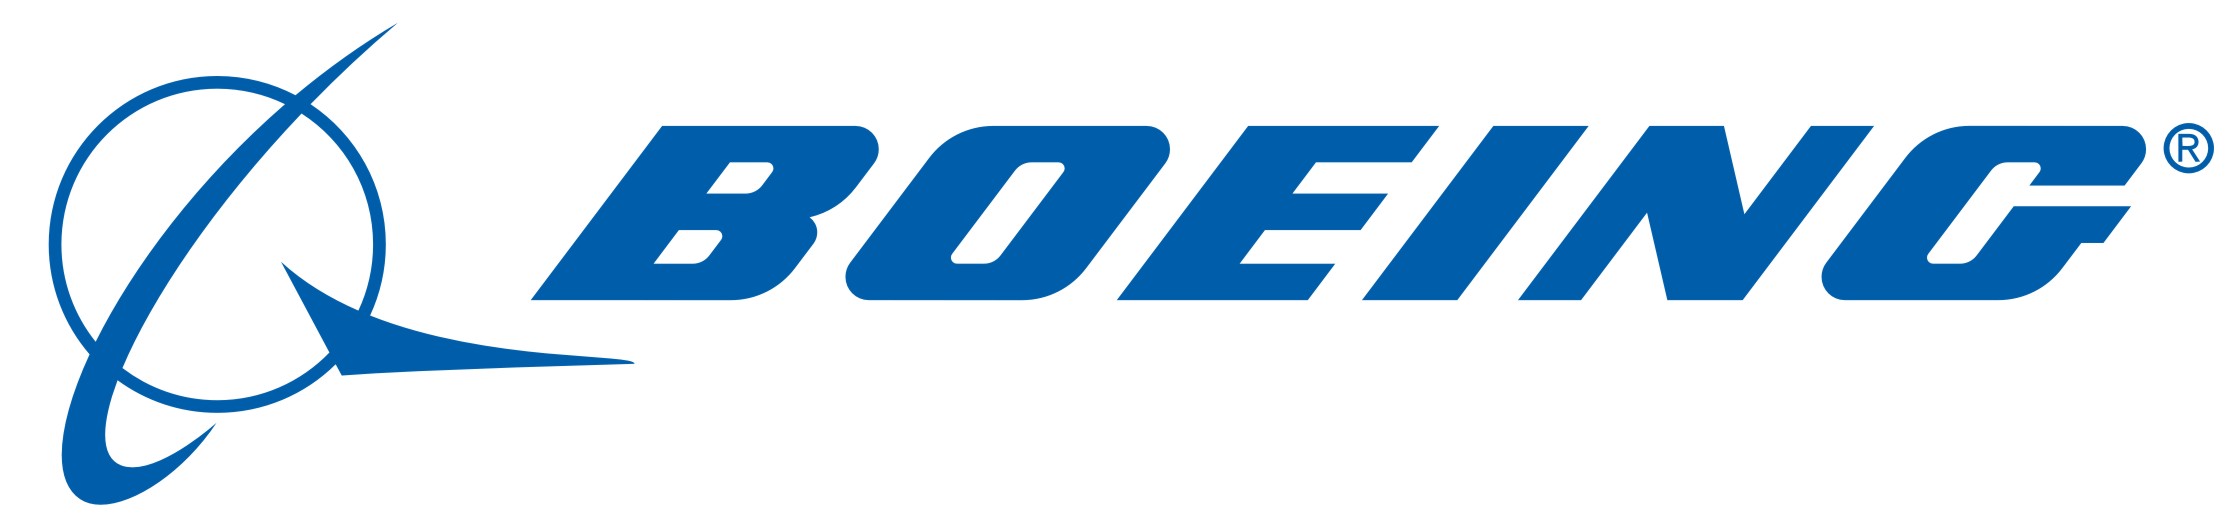 More about Boeing